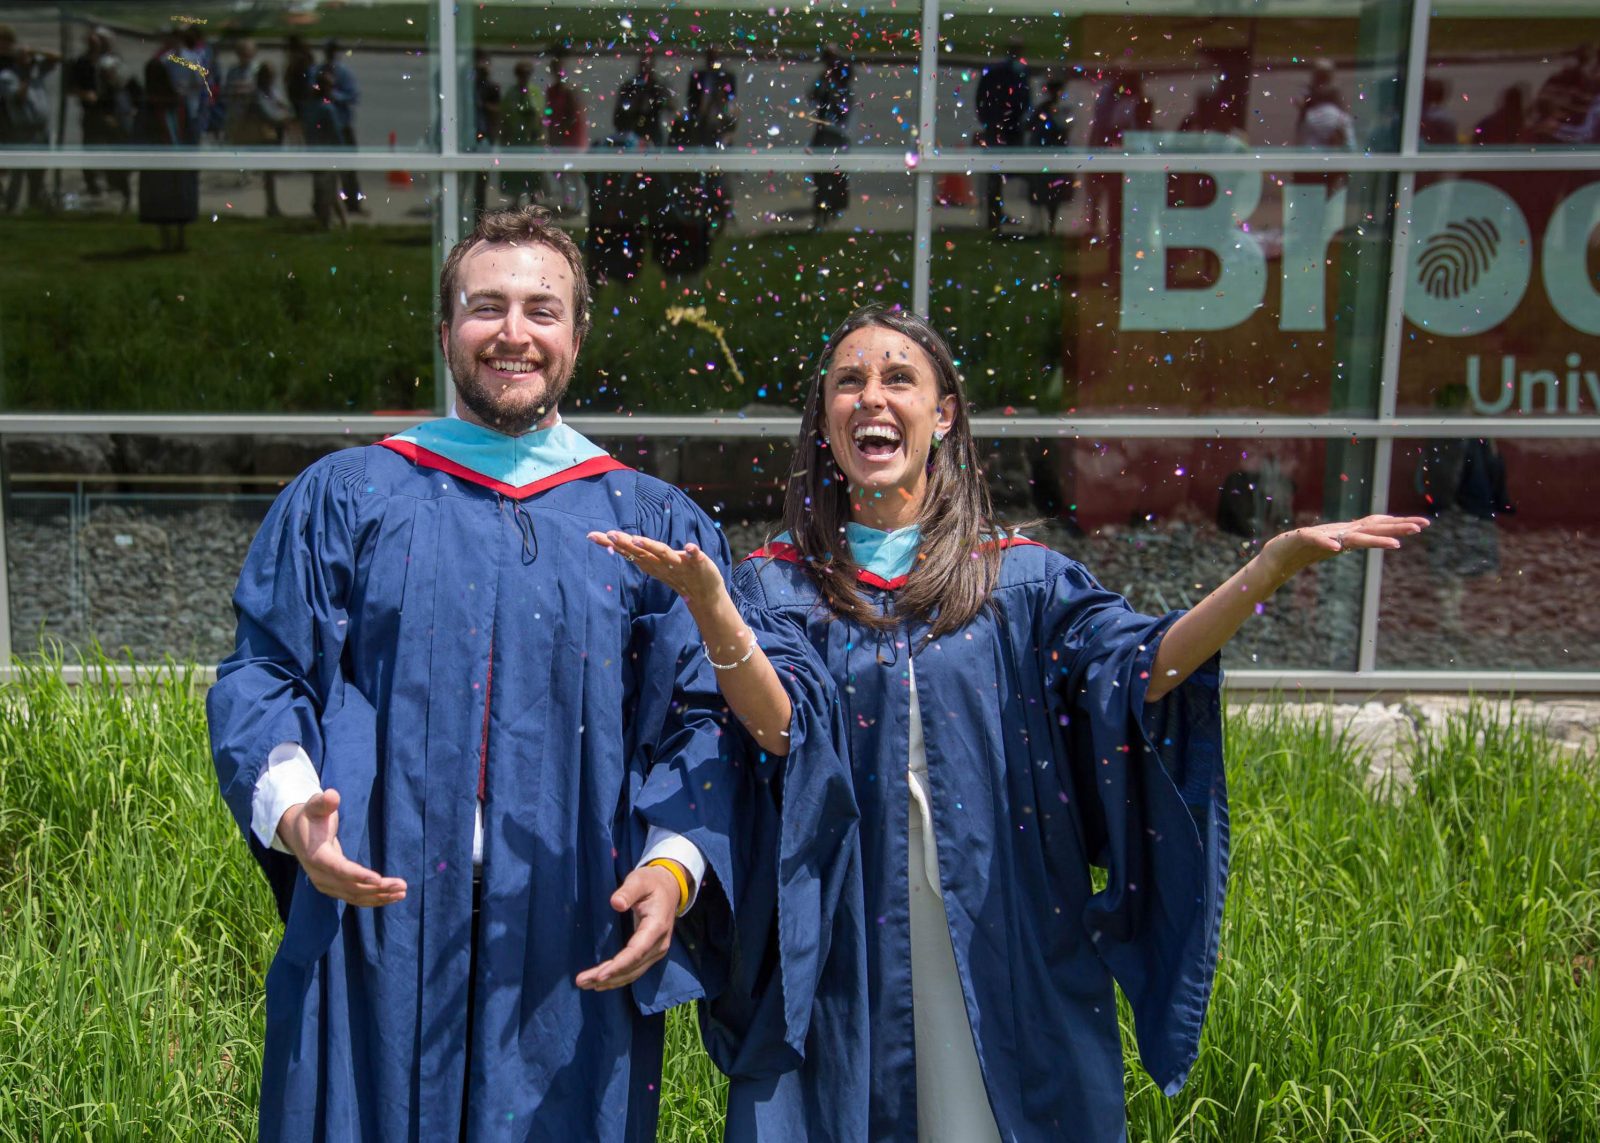 One male and one female university graduate throw confetti in the air while standing in front of a glass building.